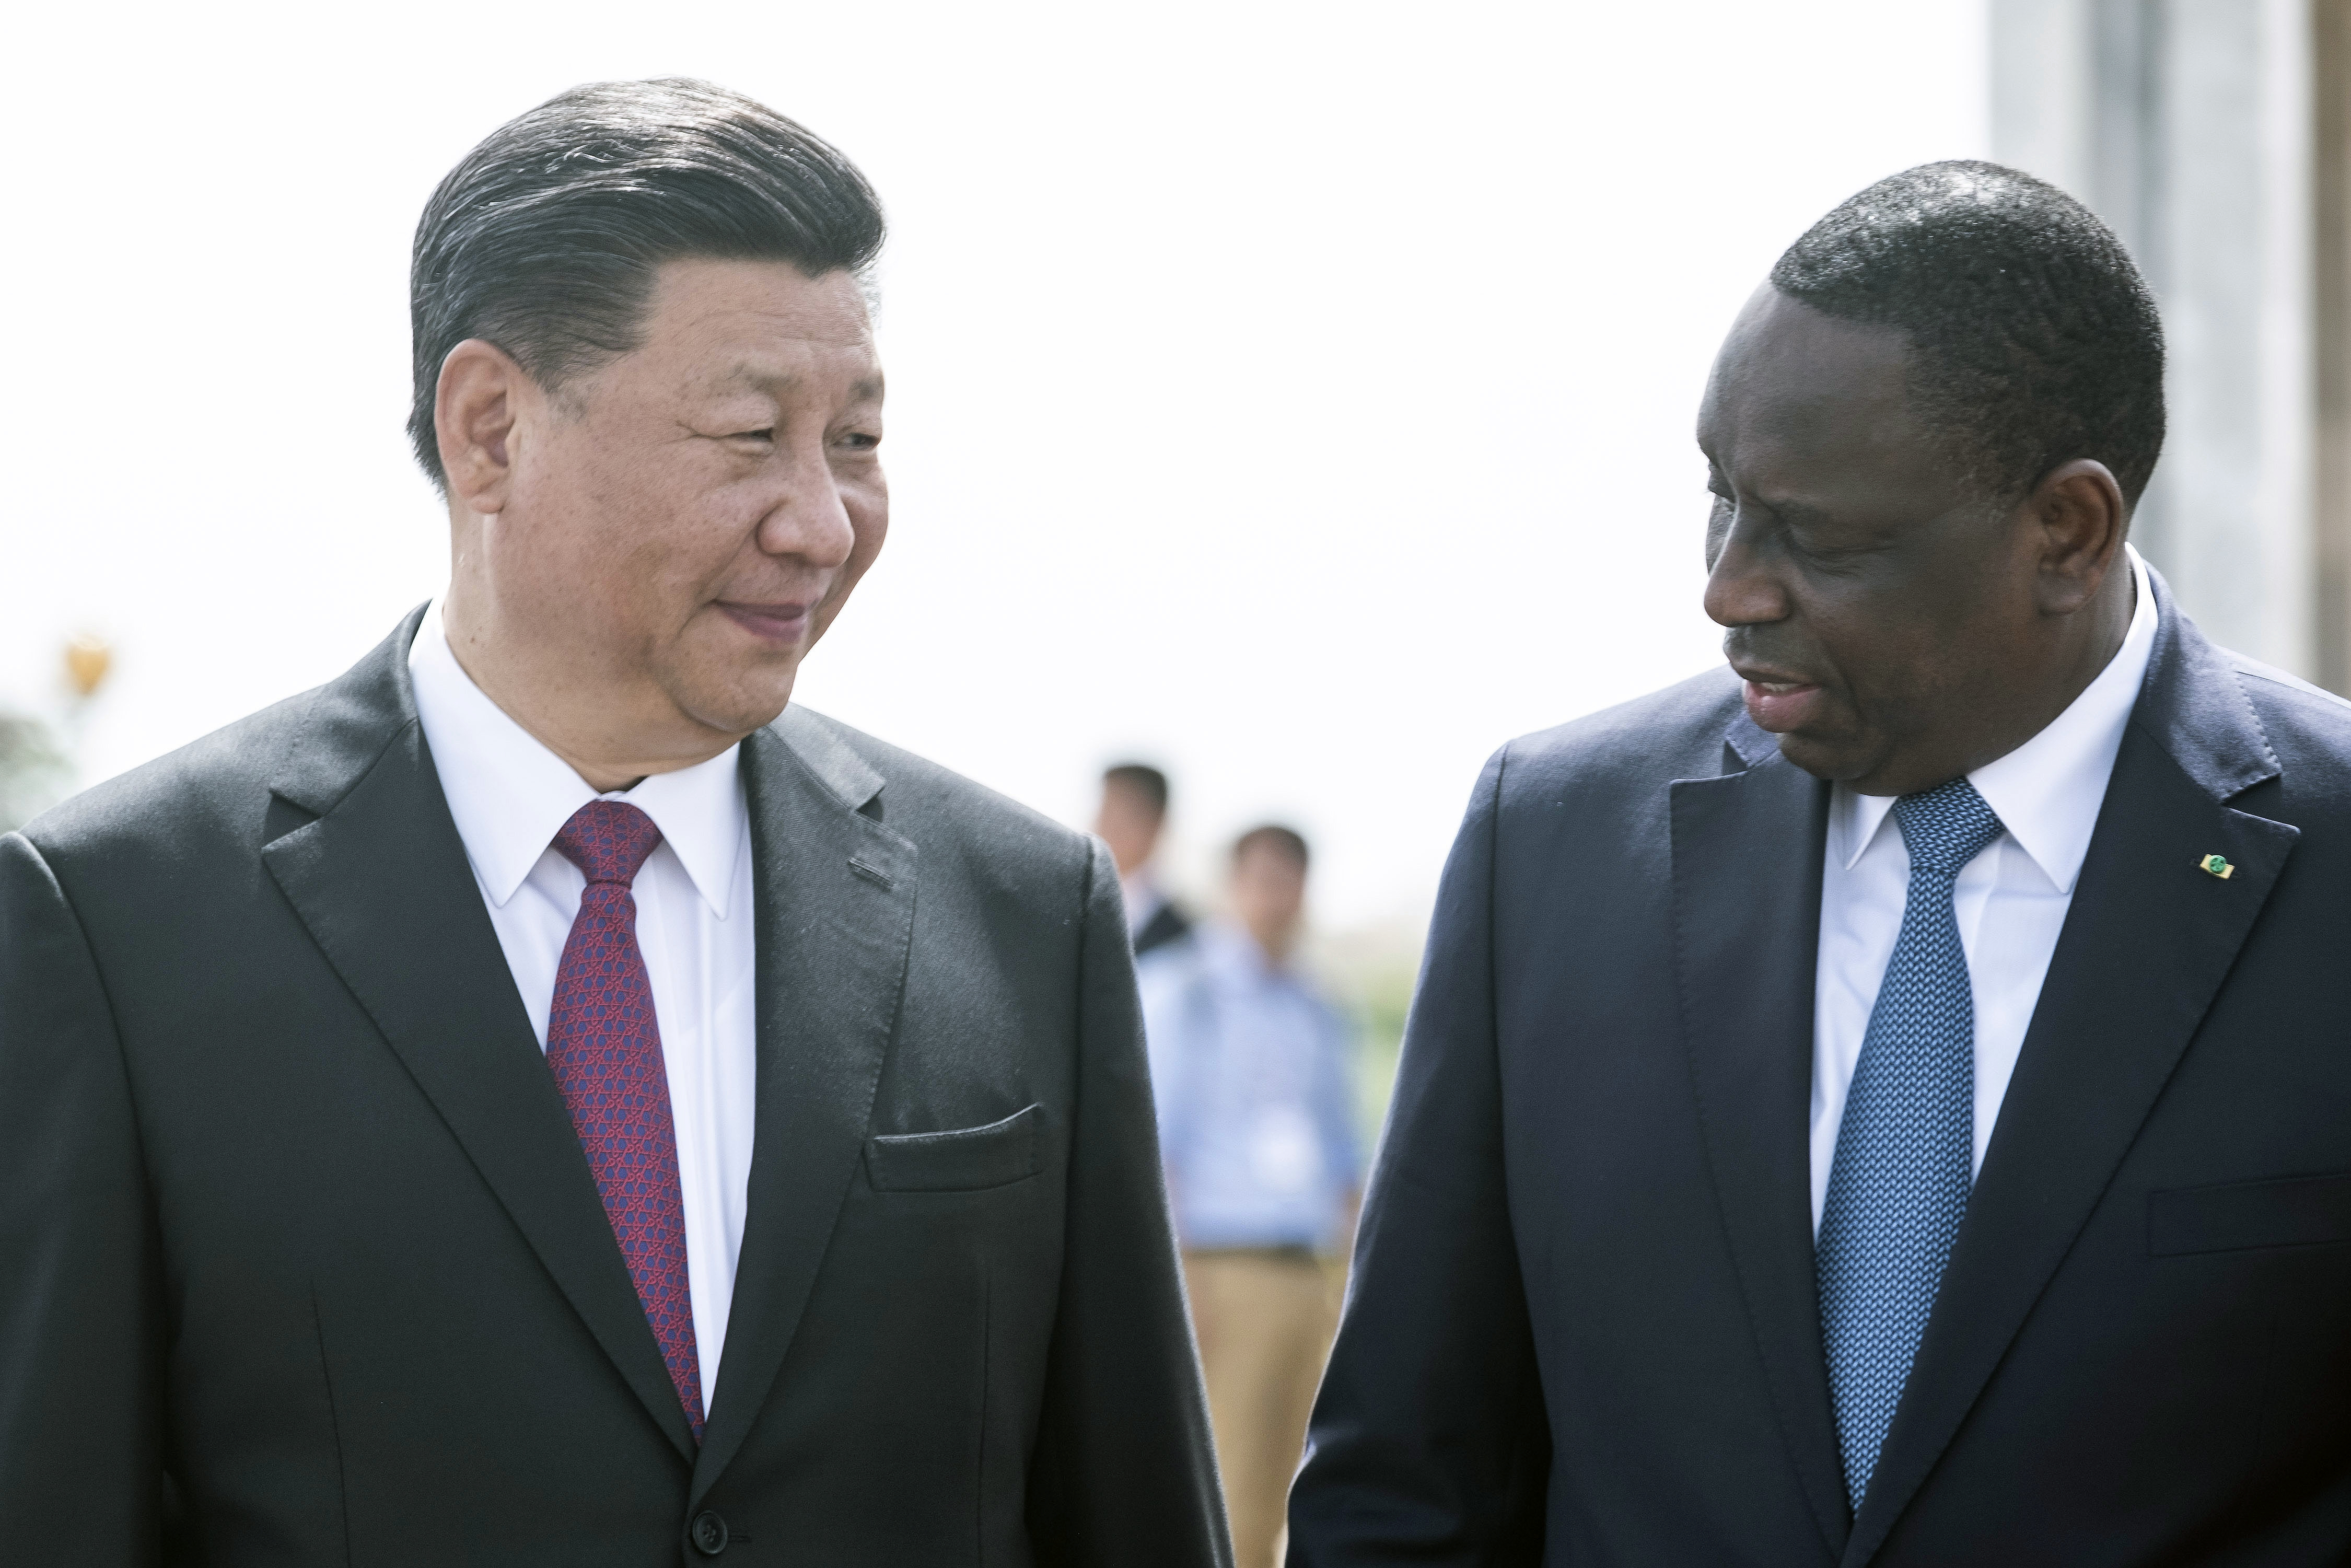 Senegal president Macky Sall, right, and Chinese President Xi Jinping, arrive at the State House in Dakar, Senegal, on the first day of a state visit Saturday, July 21, 2018. Chinese President Xi Jinping arrived in Africa on Saturday on a four-nation visit, seeking deeper military and economic ties.(AP Photo/Xaume Olleros)